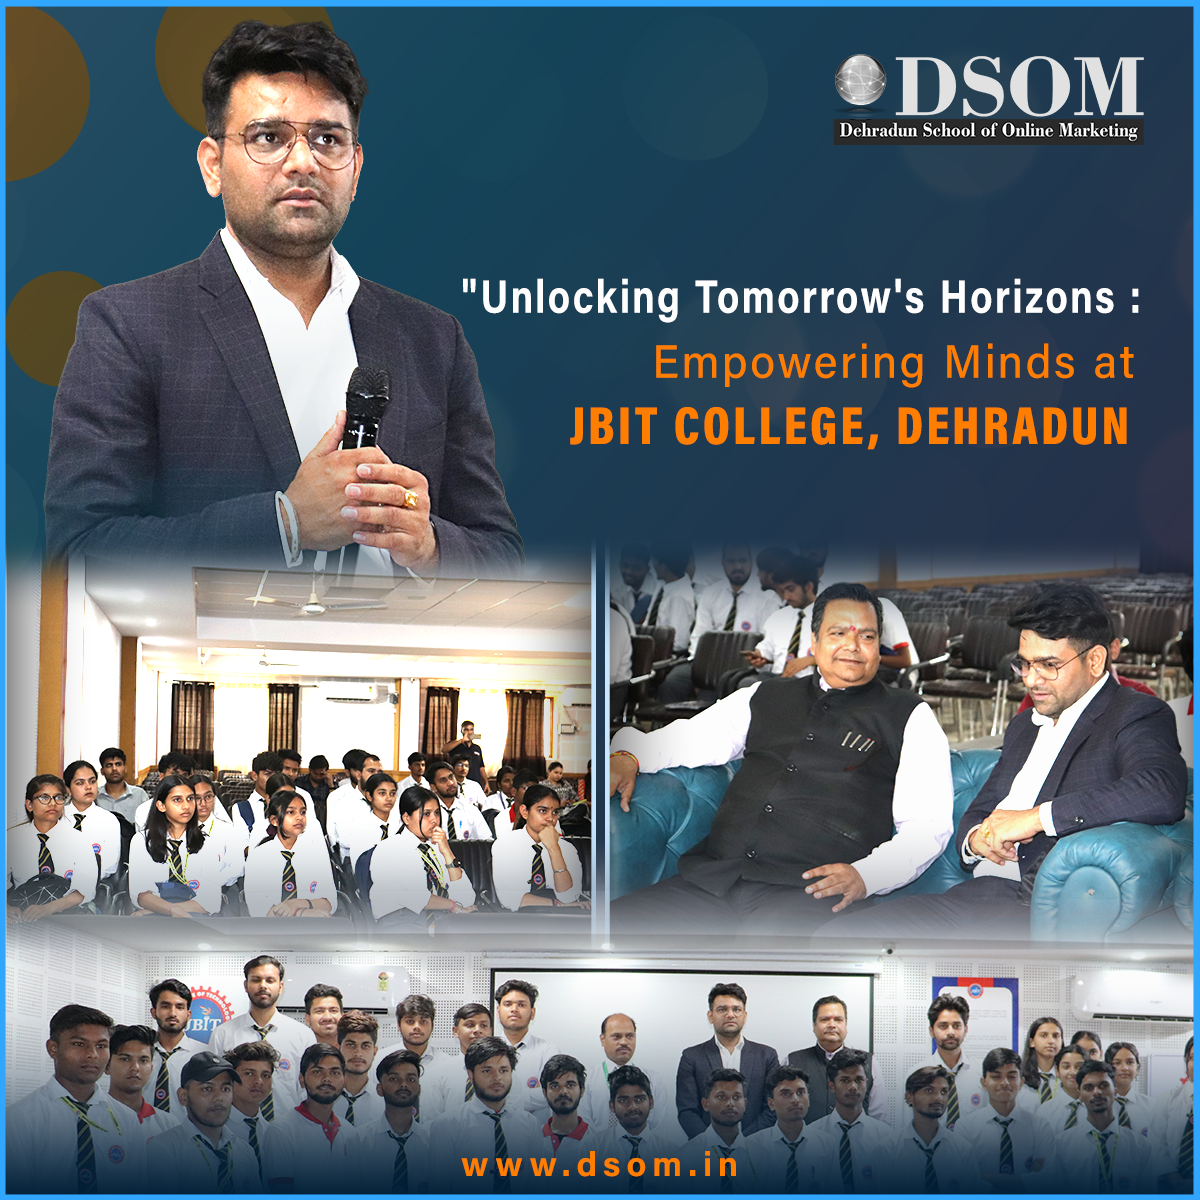 Dehradun is buzzing with digital knowledge as DSOM empowers JBIT College students with marketing skills